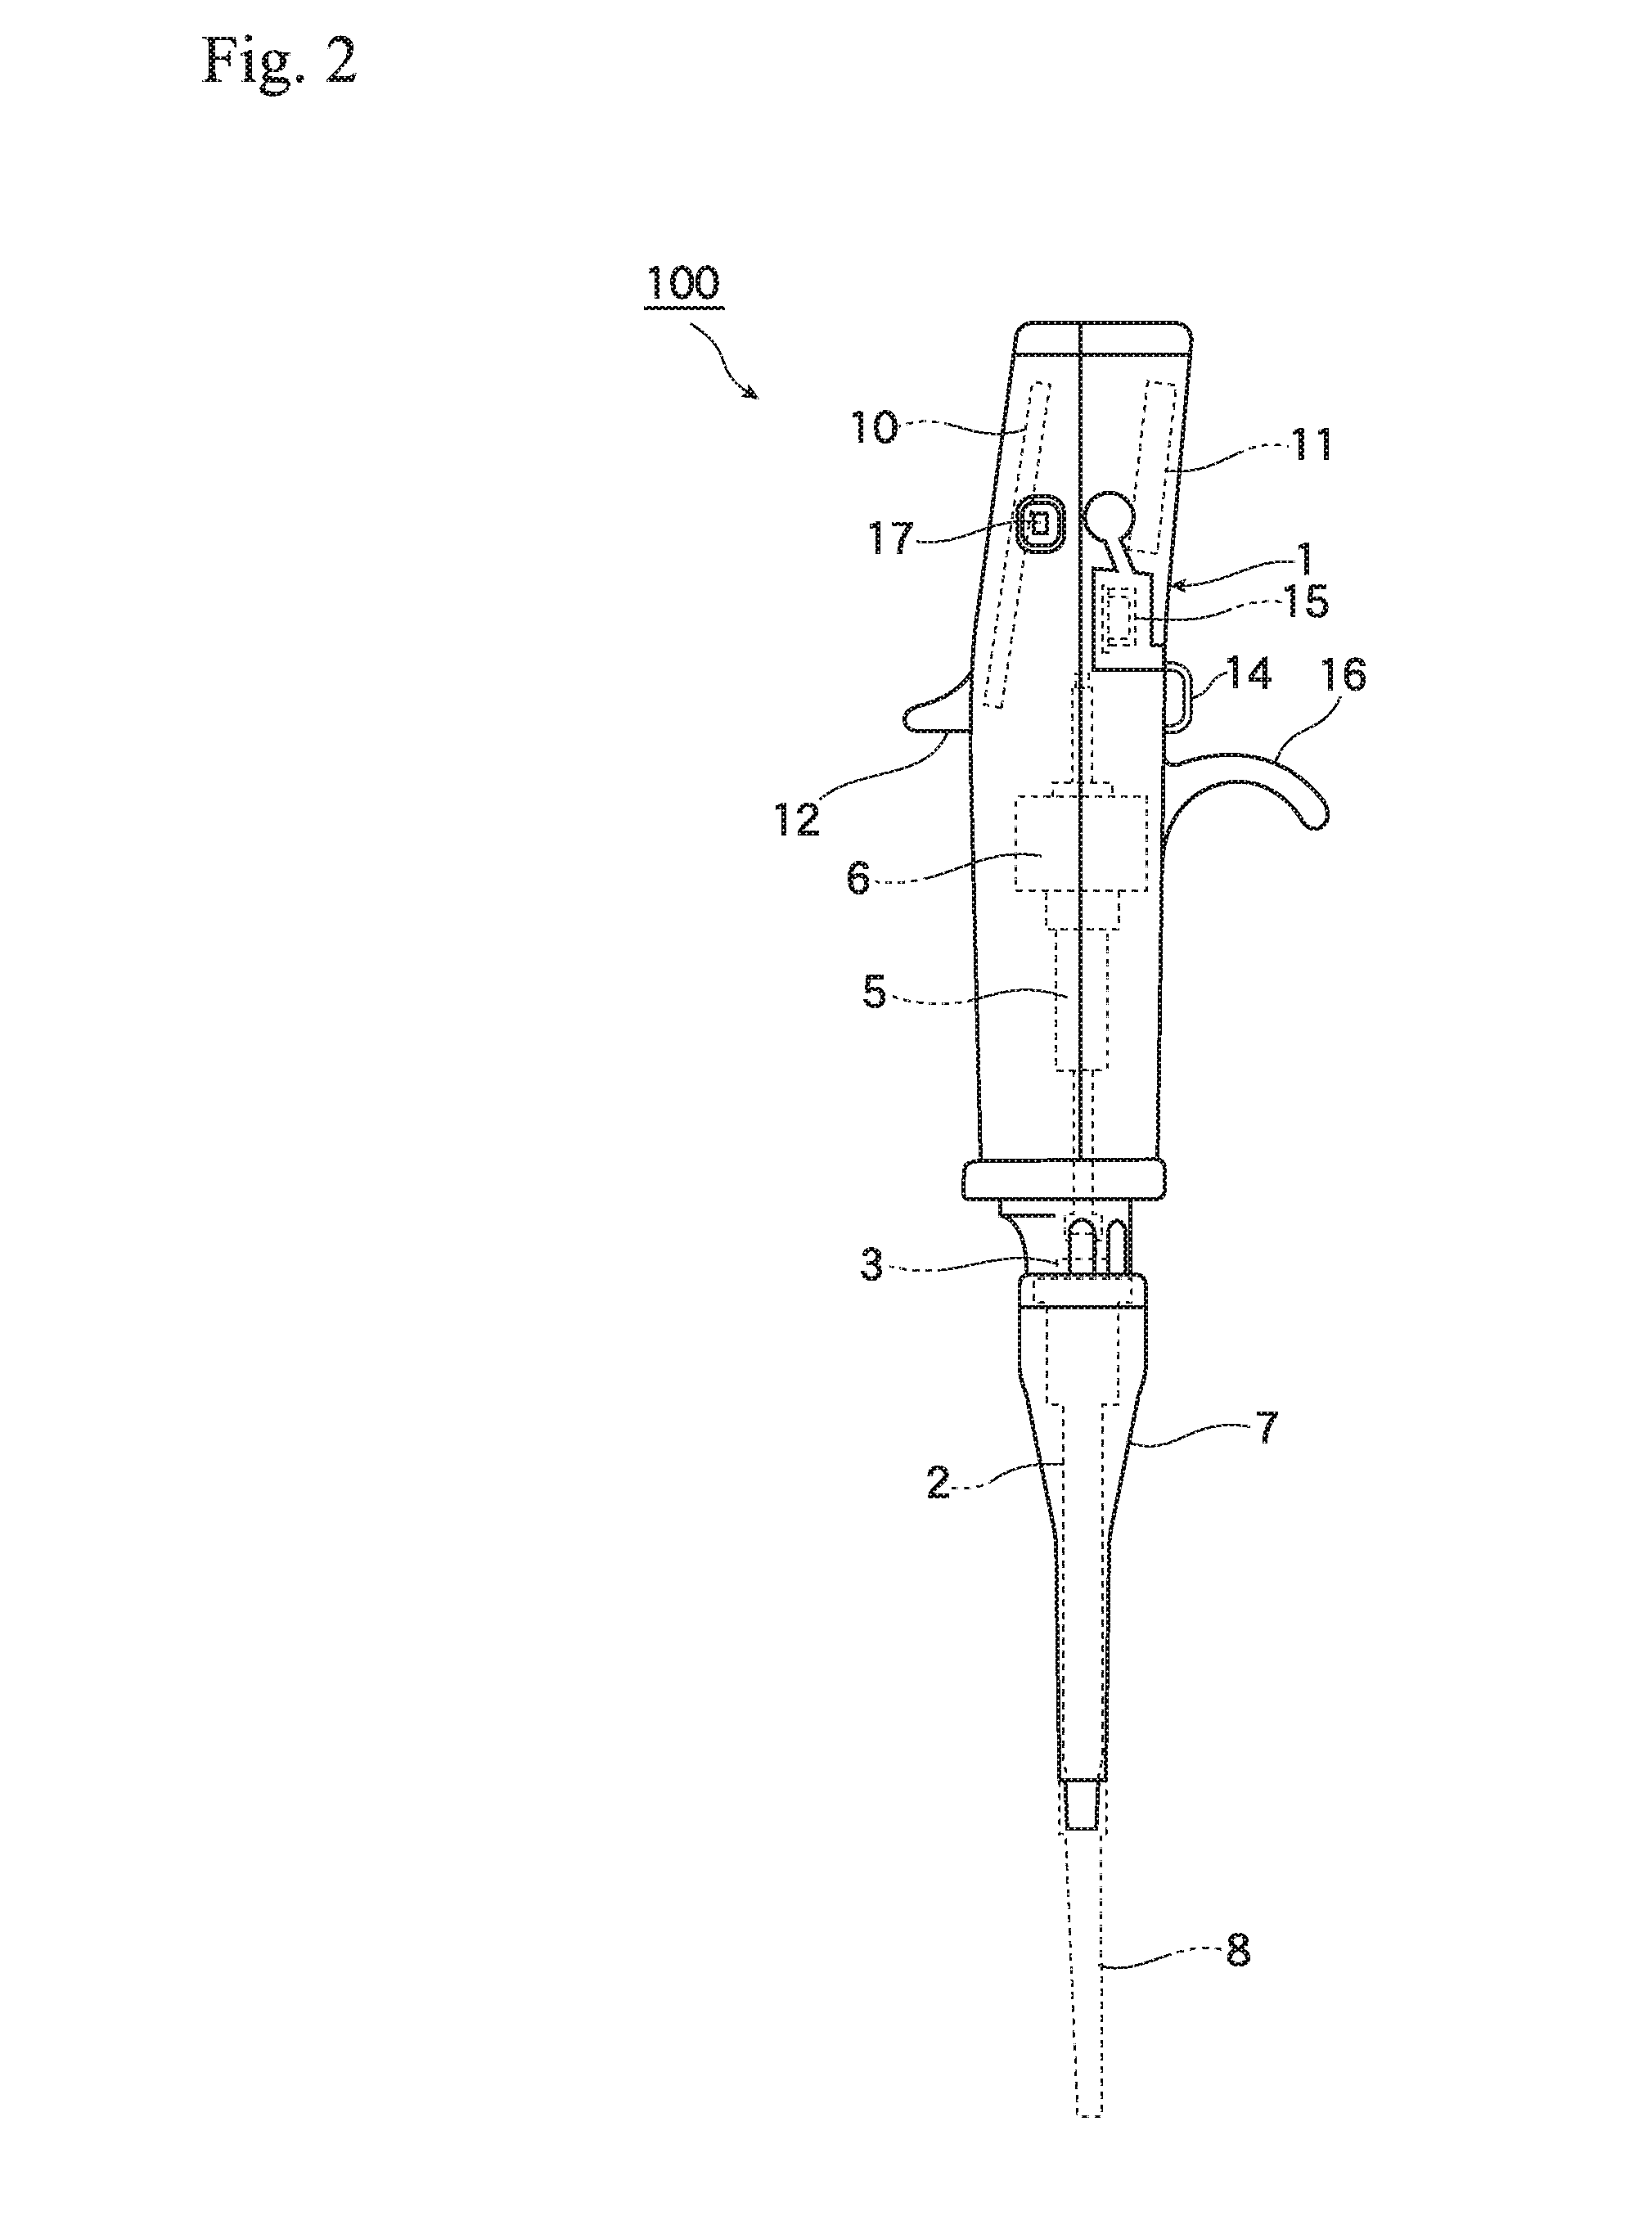 Method for accurately calibrating discharge volume of pipette, and apparatus therefor